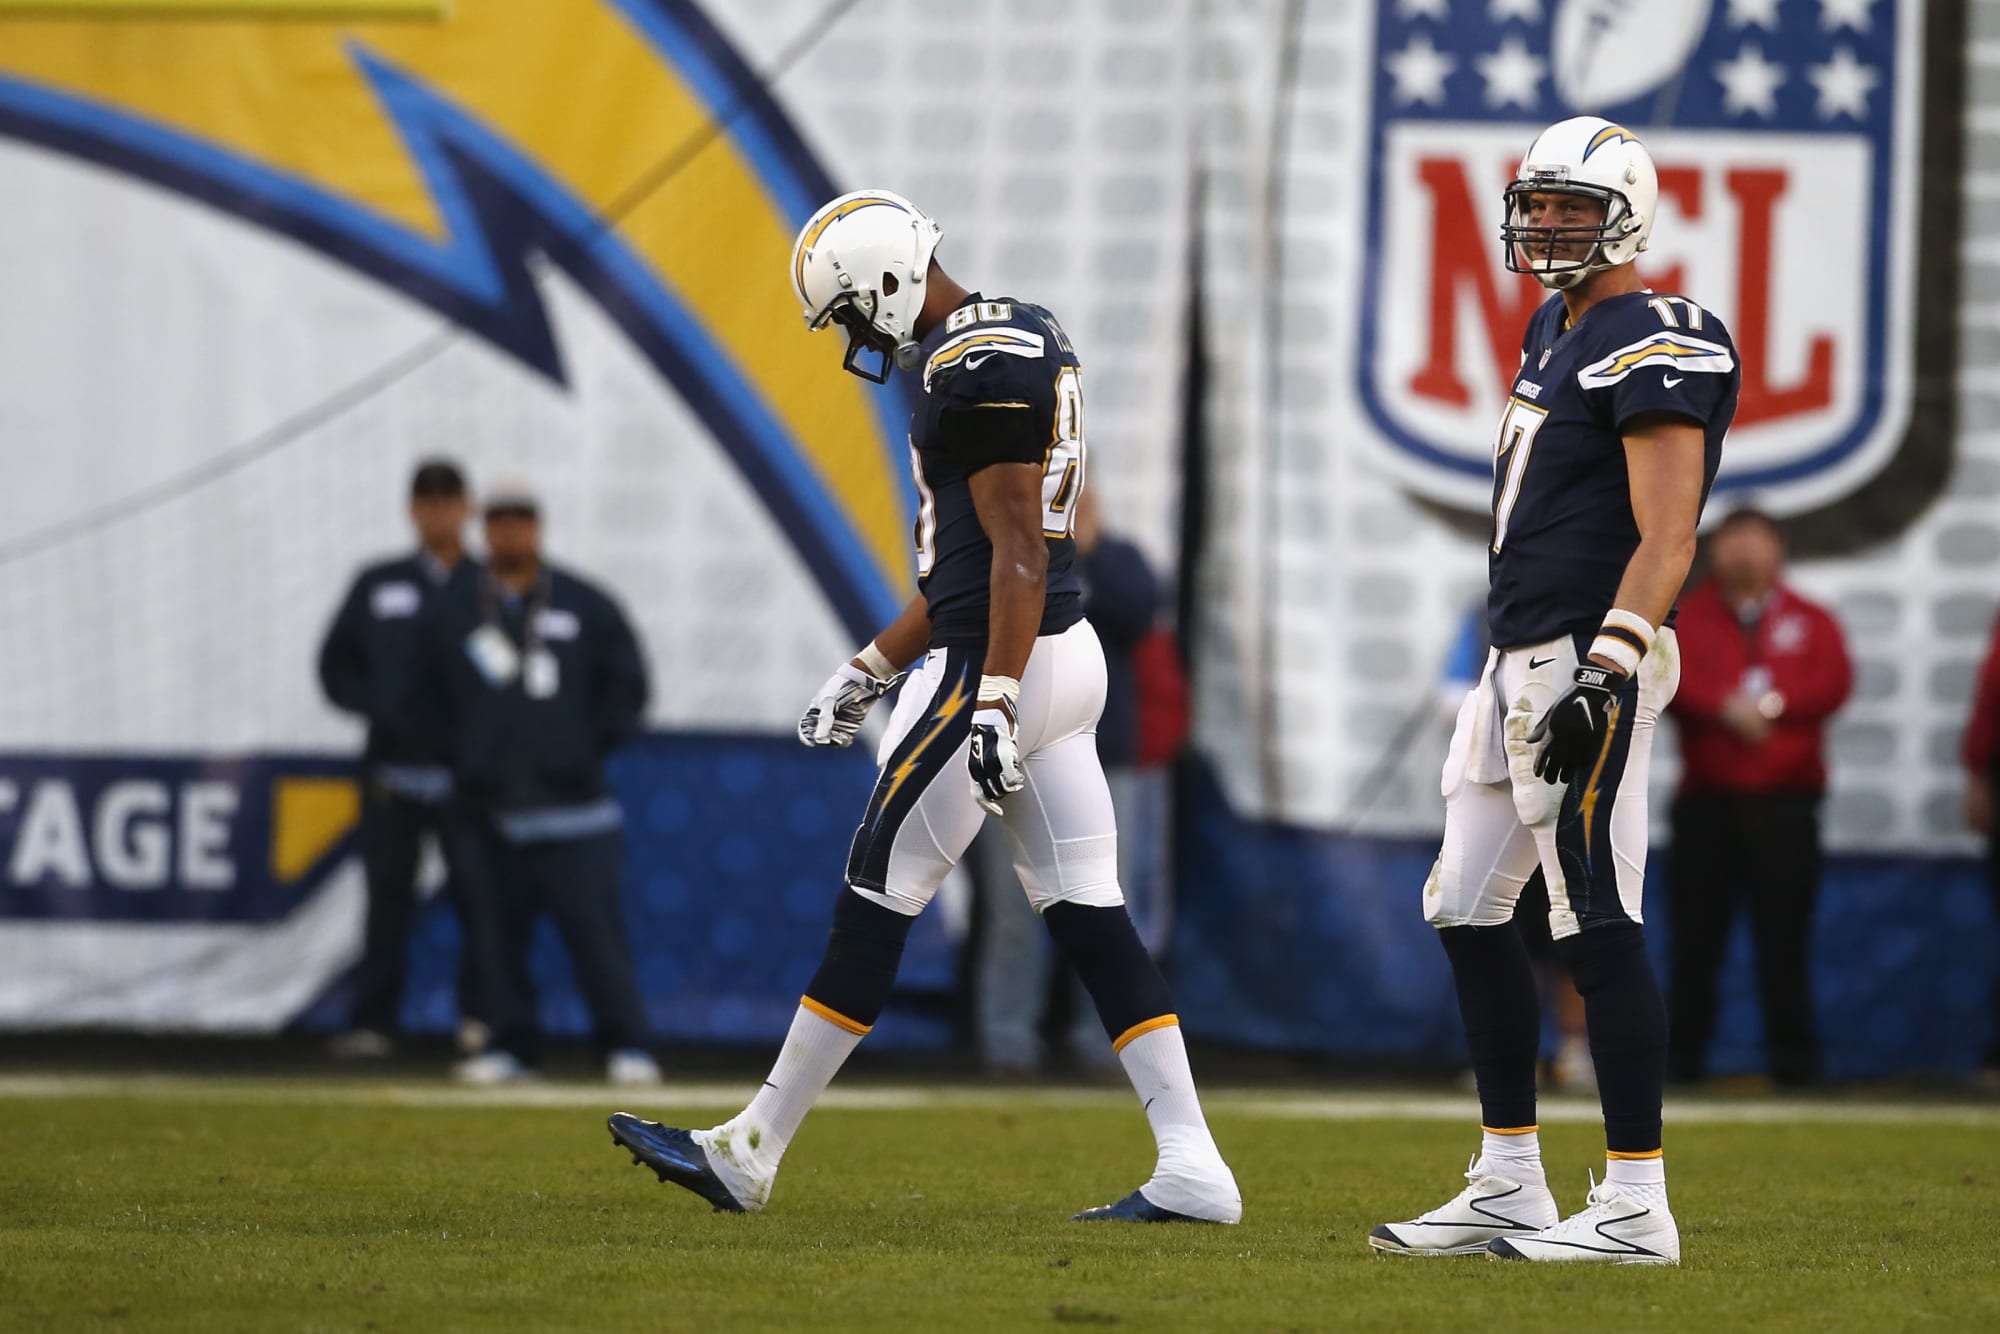 Best Chargers regular season games of the last decade